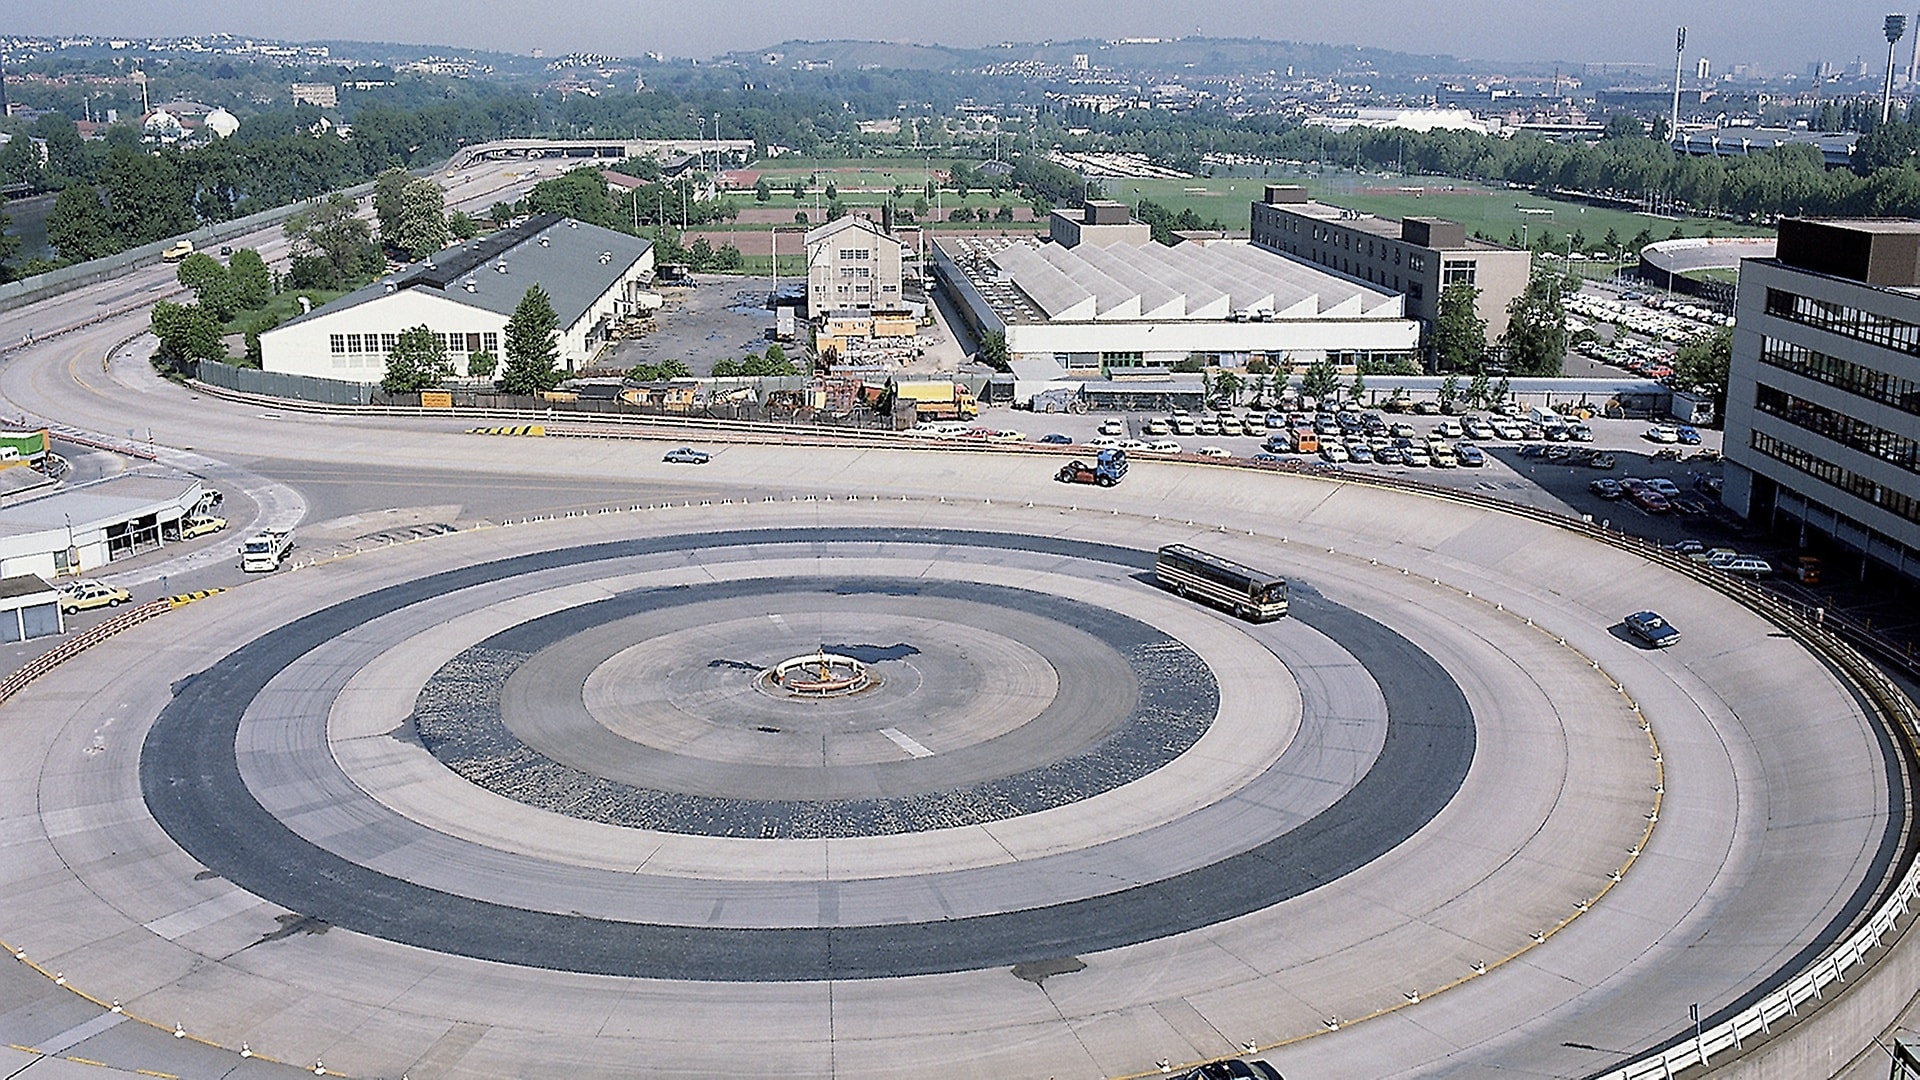 The skid pad of the test track at the Untertürkheim plant, made up of concentric rings with different surface finishes. Photograph from 1984.